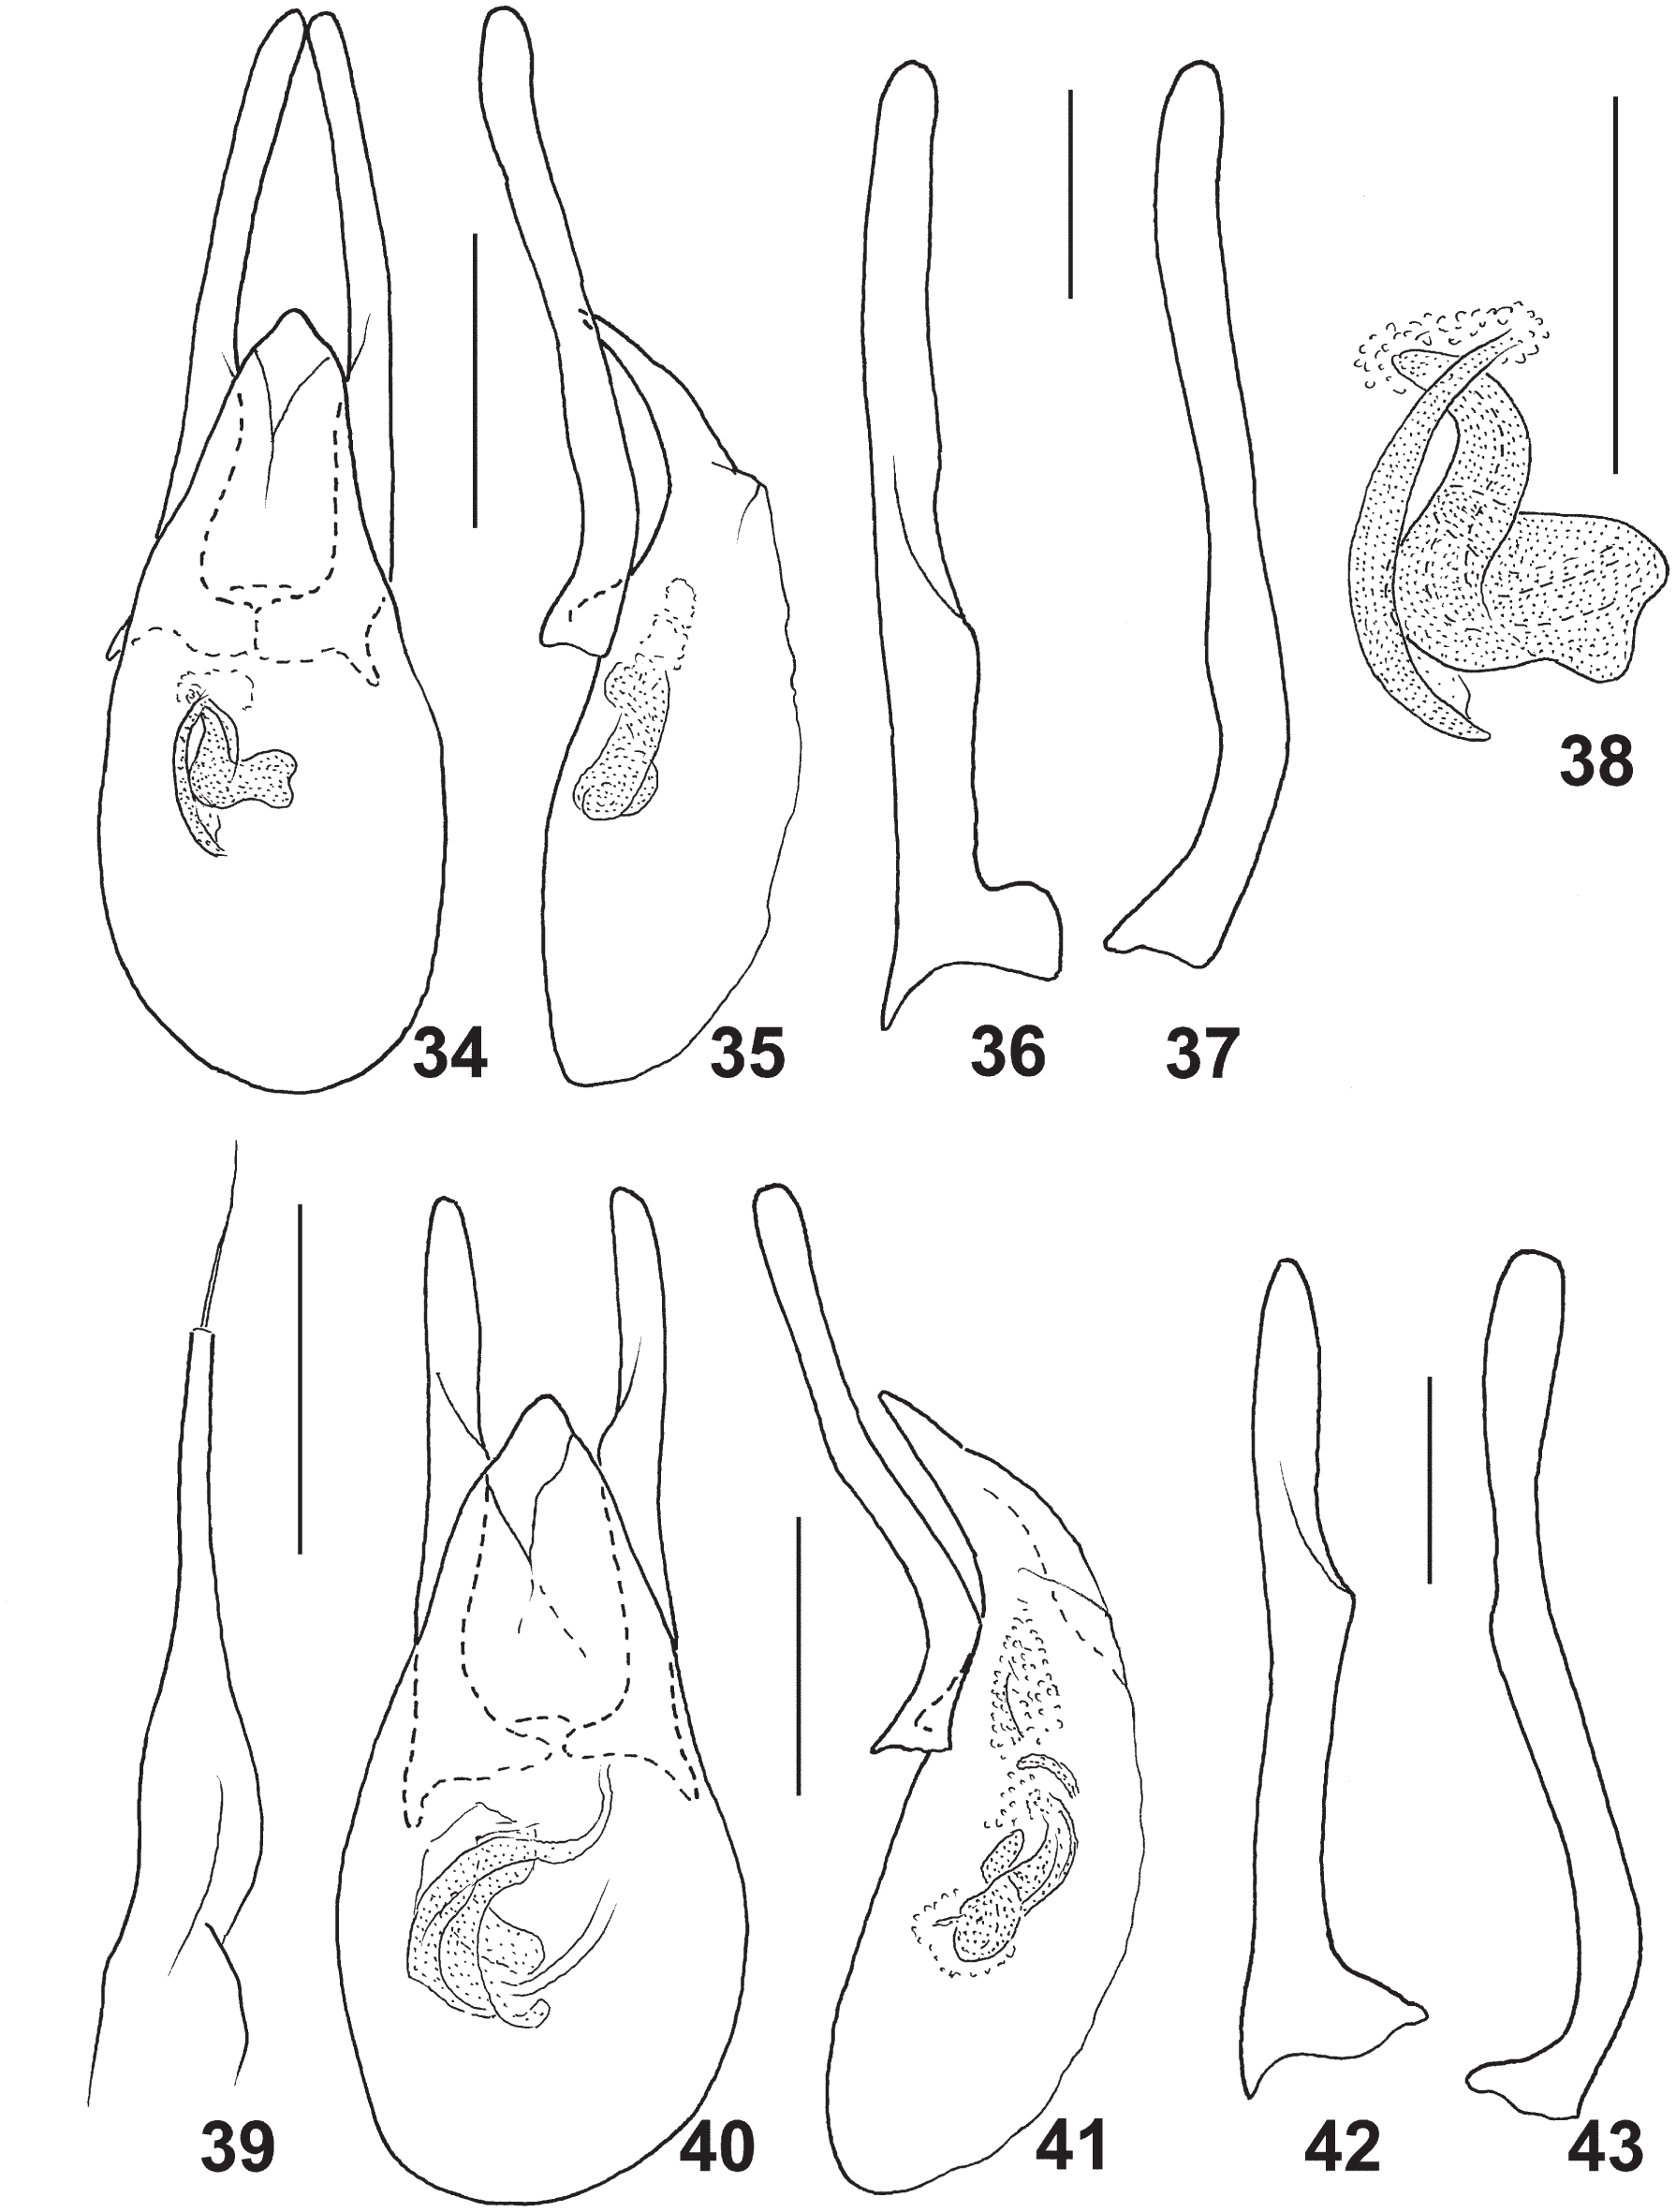 Aedeagus lateral view: 90, 92, 94, 96, 98, 100; parameres dorsal view